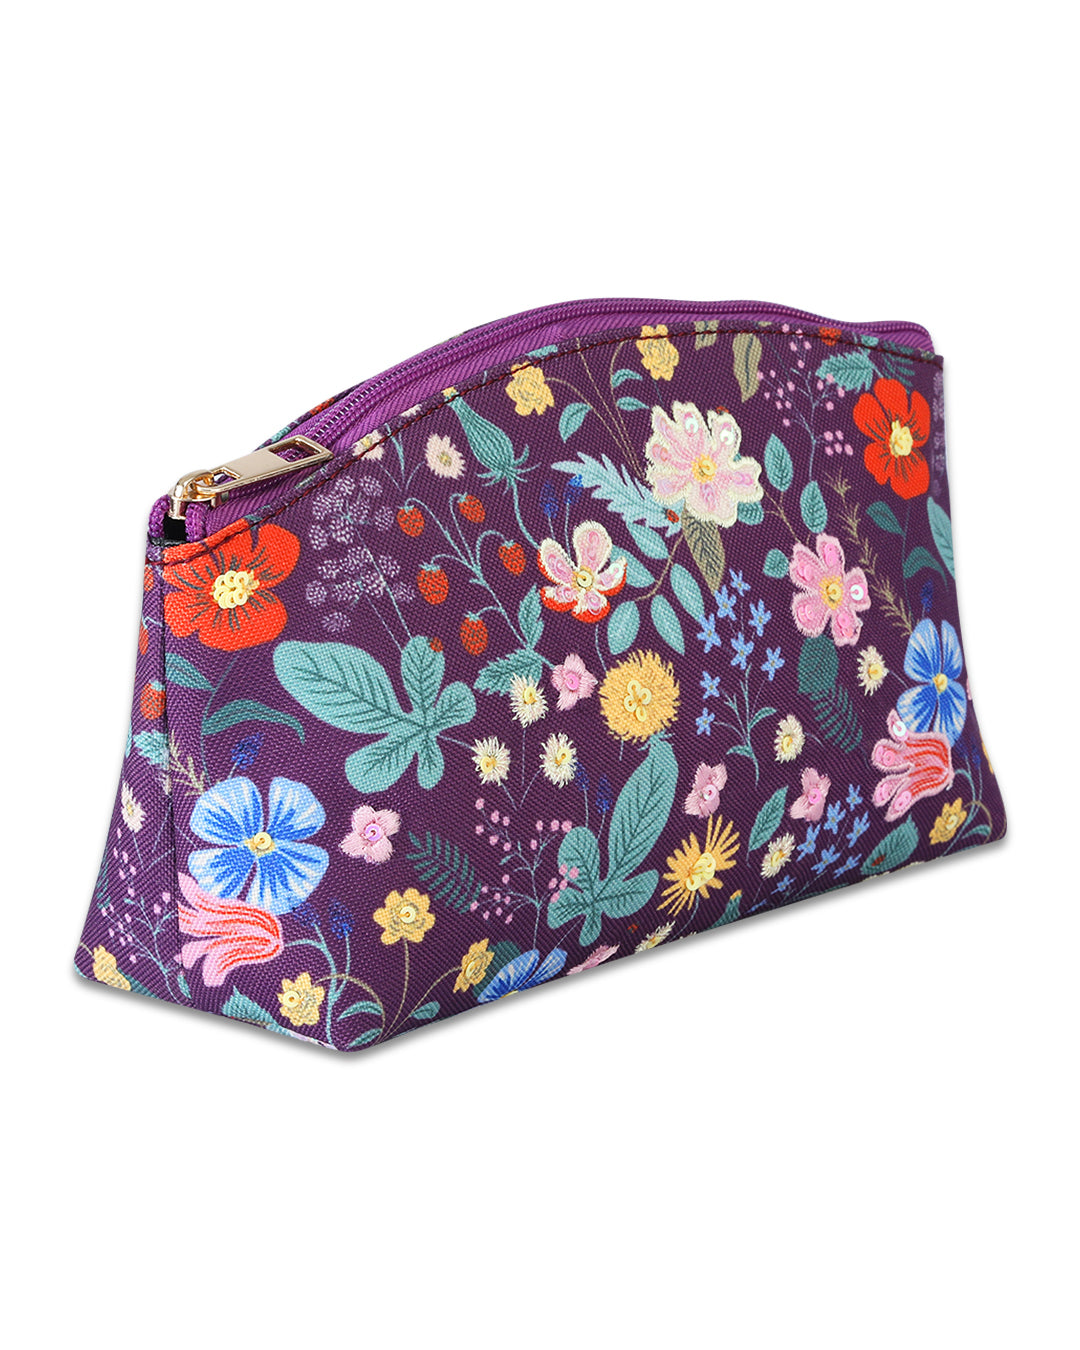 Enchanted Forest Toiletry Bag